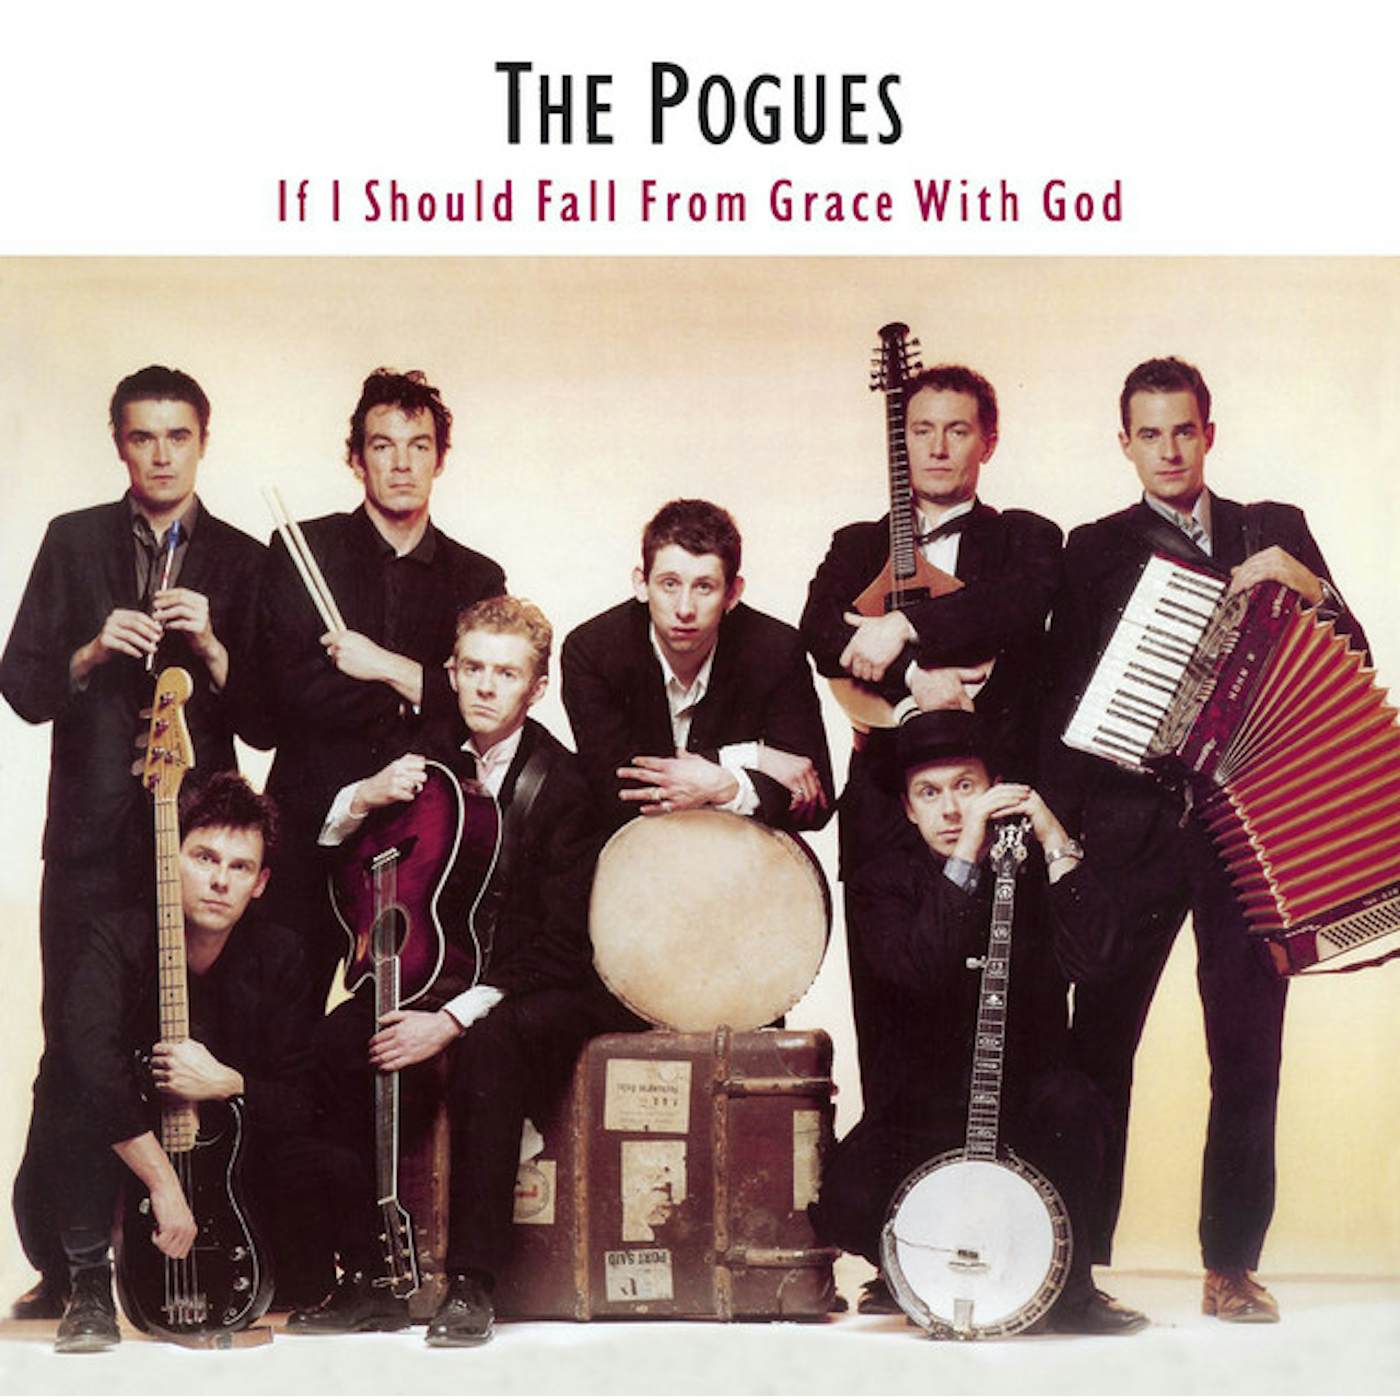 The Pogues IF I SHOULD FALL FROM GRACE WITH GOD CD